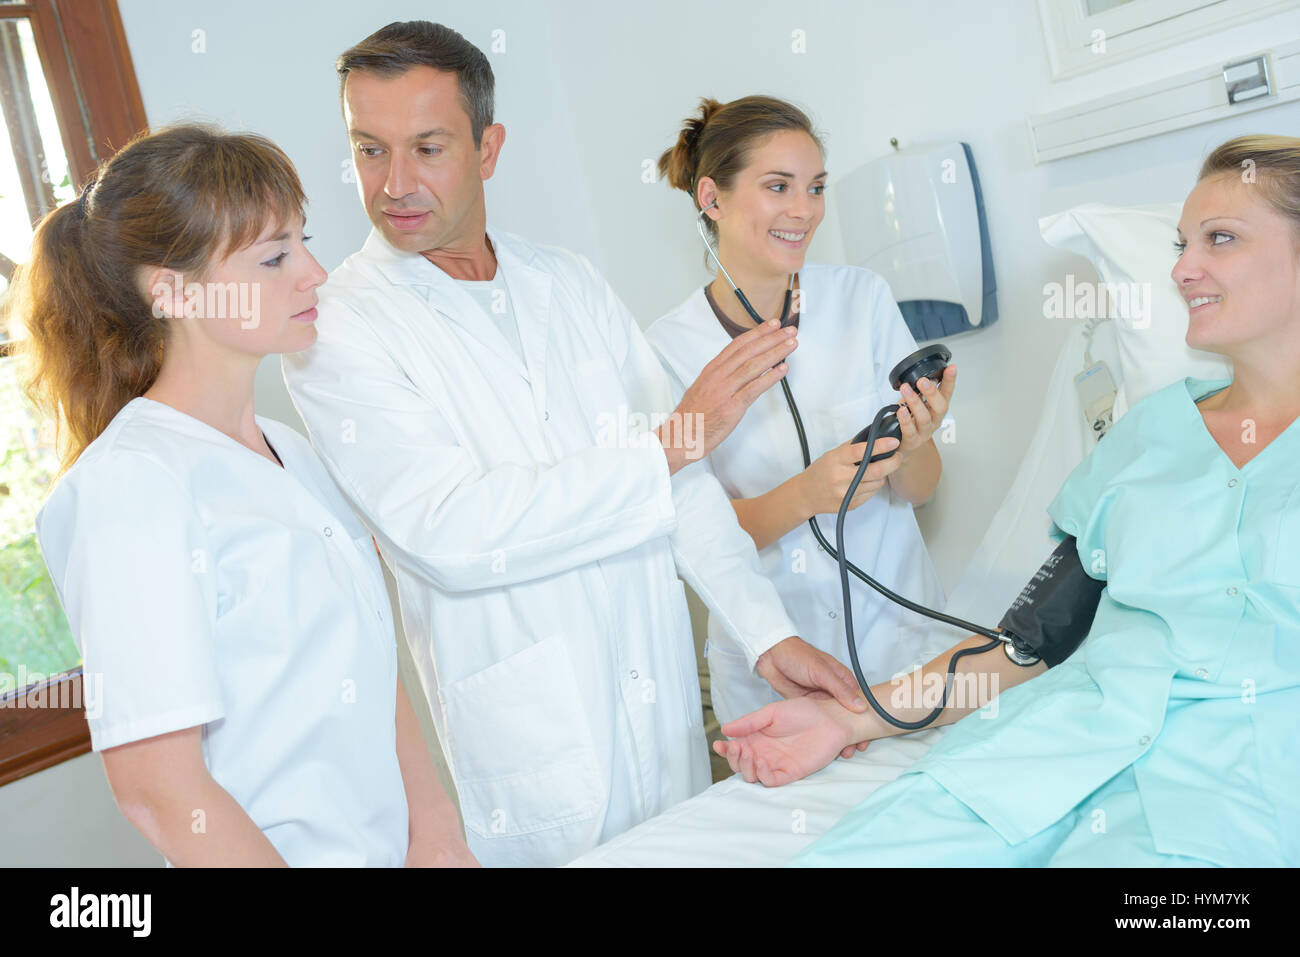 Doctor demonstrating how to take blood pressure Stock Photo